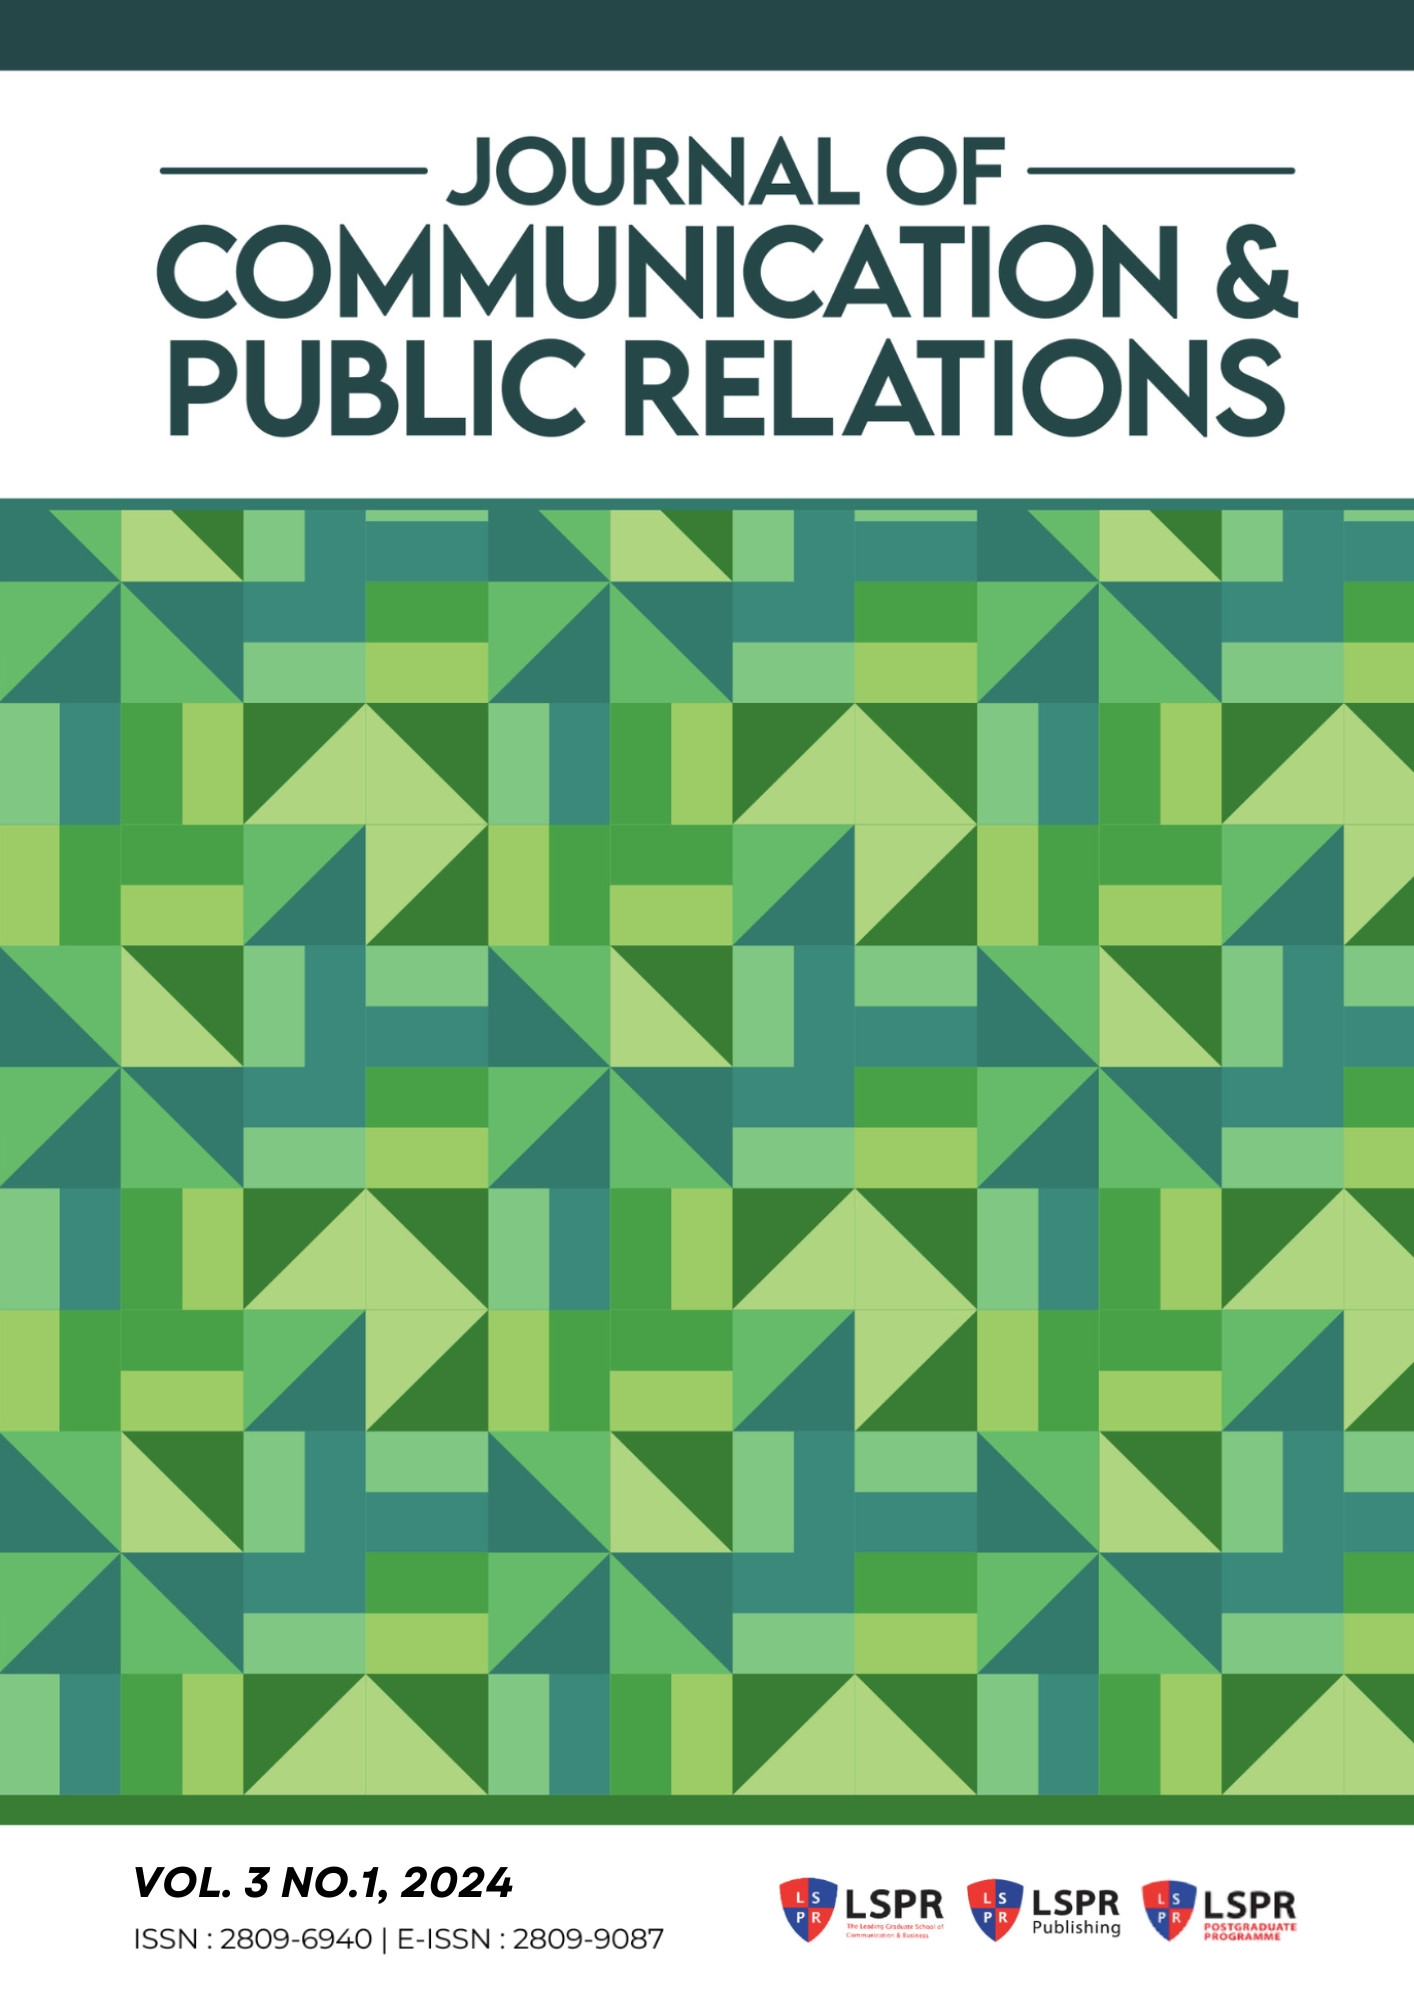 Journal of Communication and Public Relations (JCPR) Vol.3 No.1, January 2024